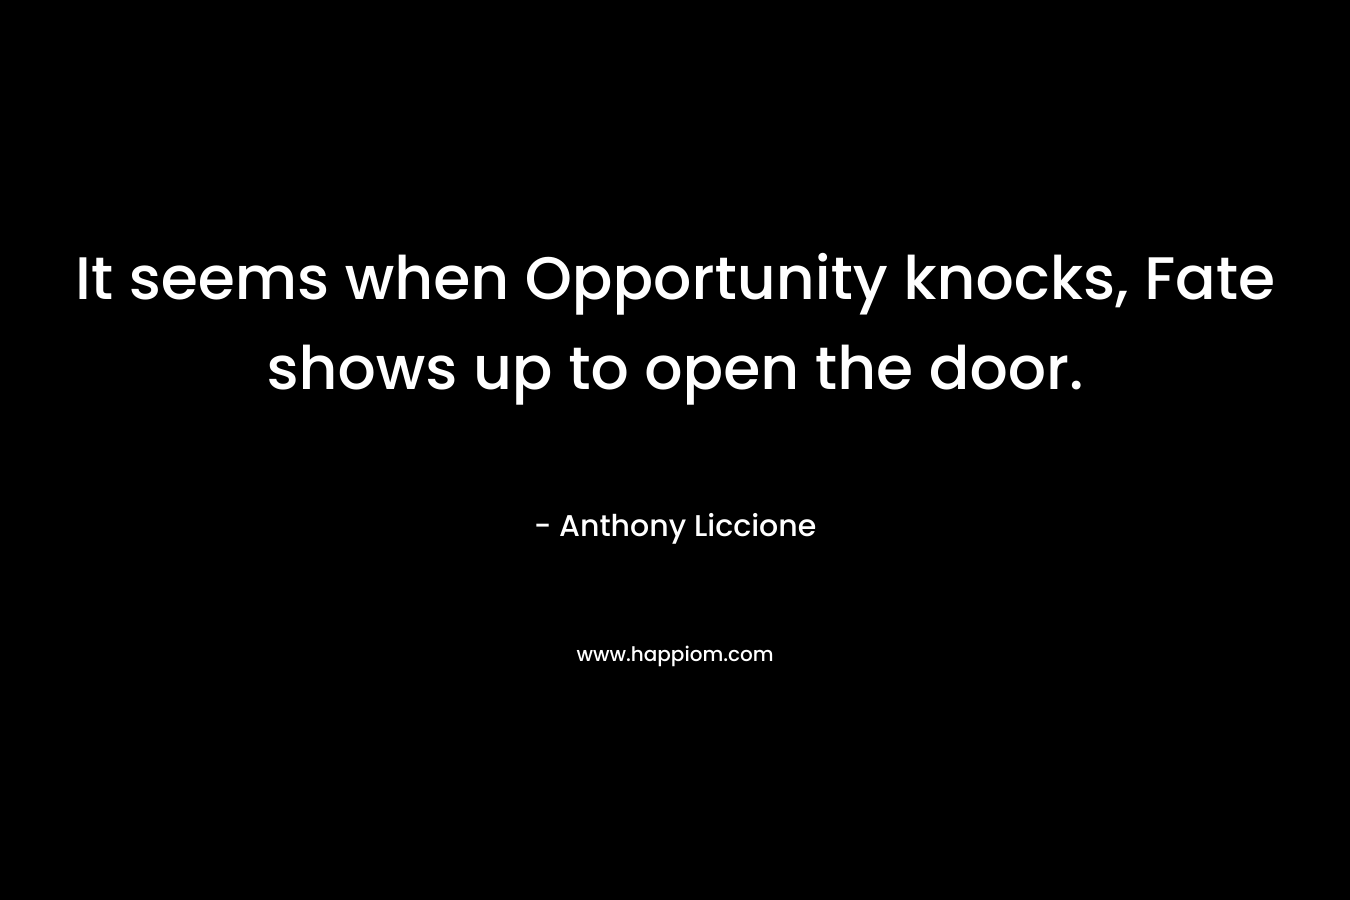 It seems when Opportunity knocks, Fate shows up to open the door.